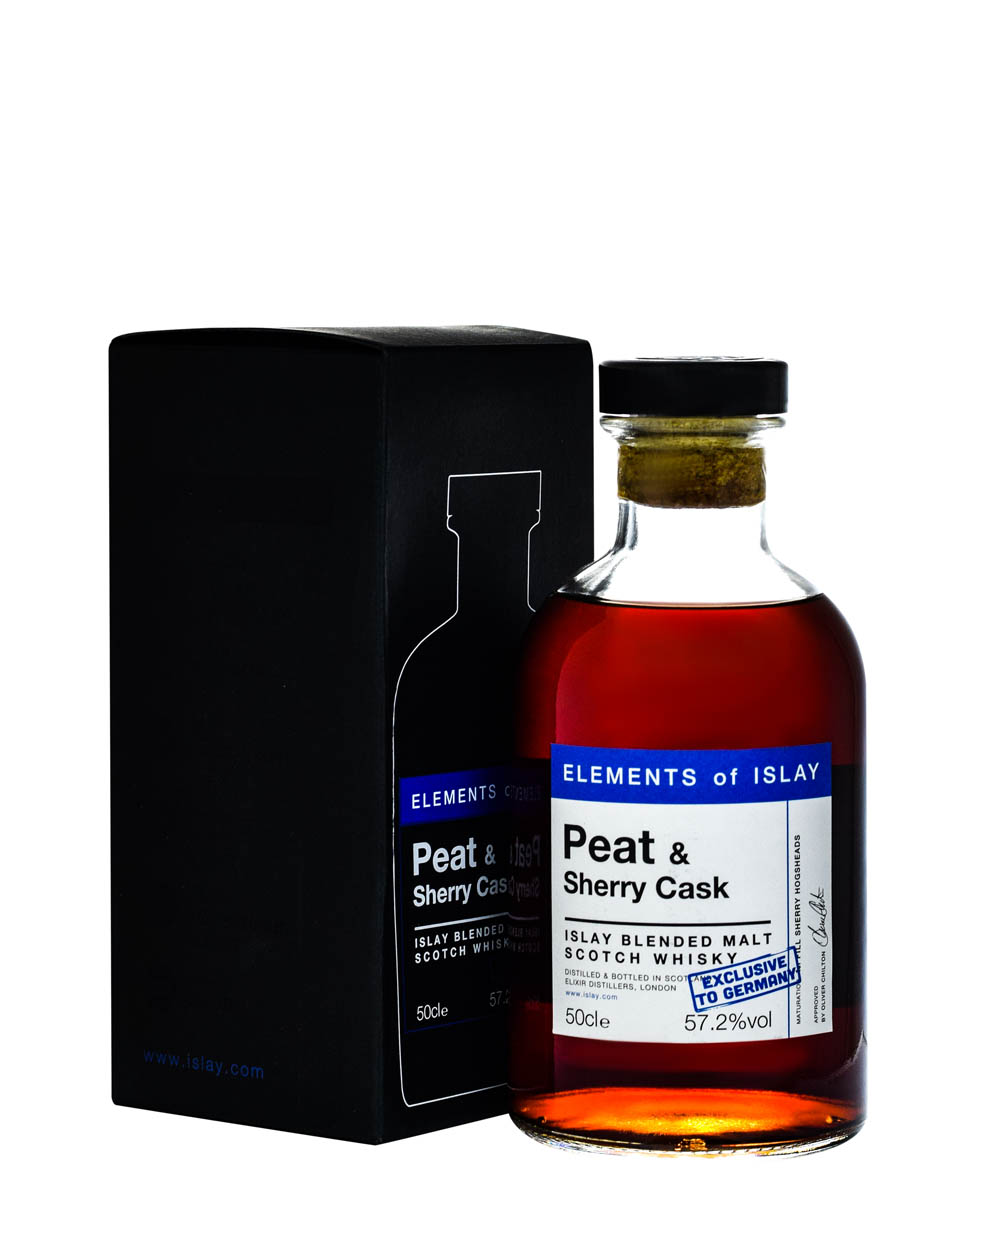 Elements of Islay Peat & Sherry Cask Exclusive to Germany Box Musthave Malts MHM